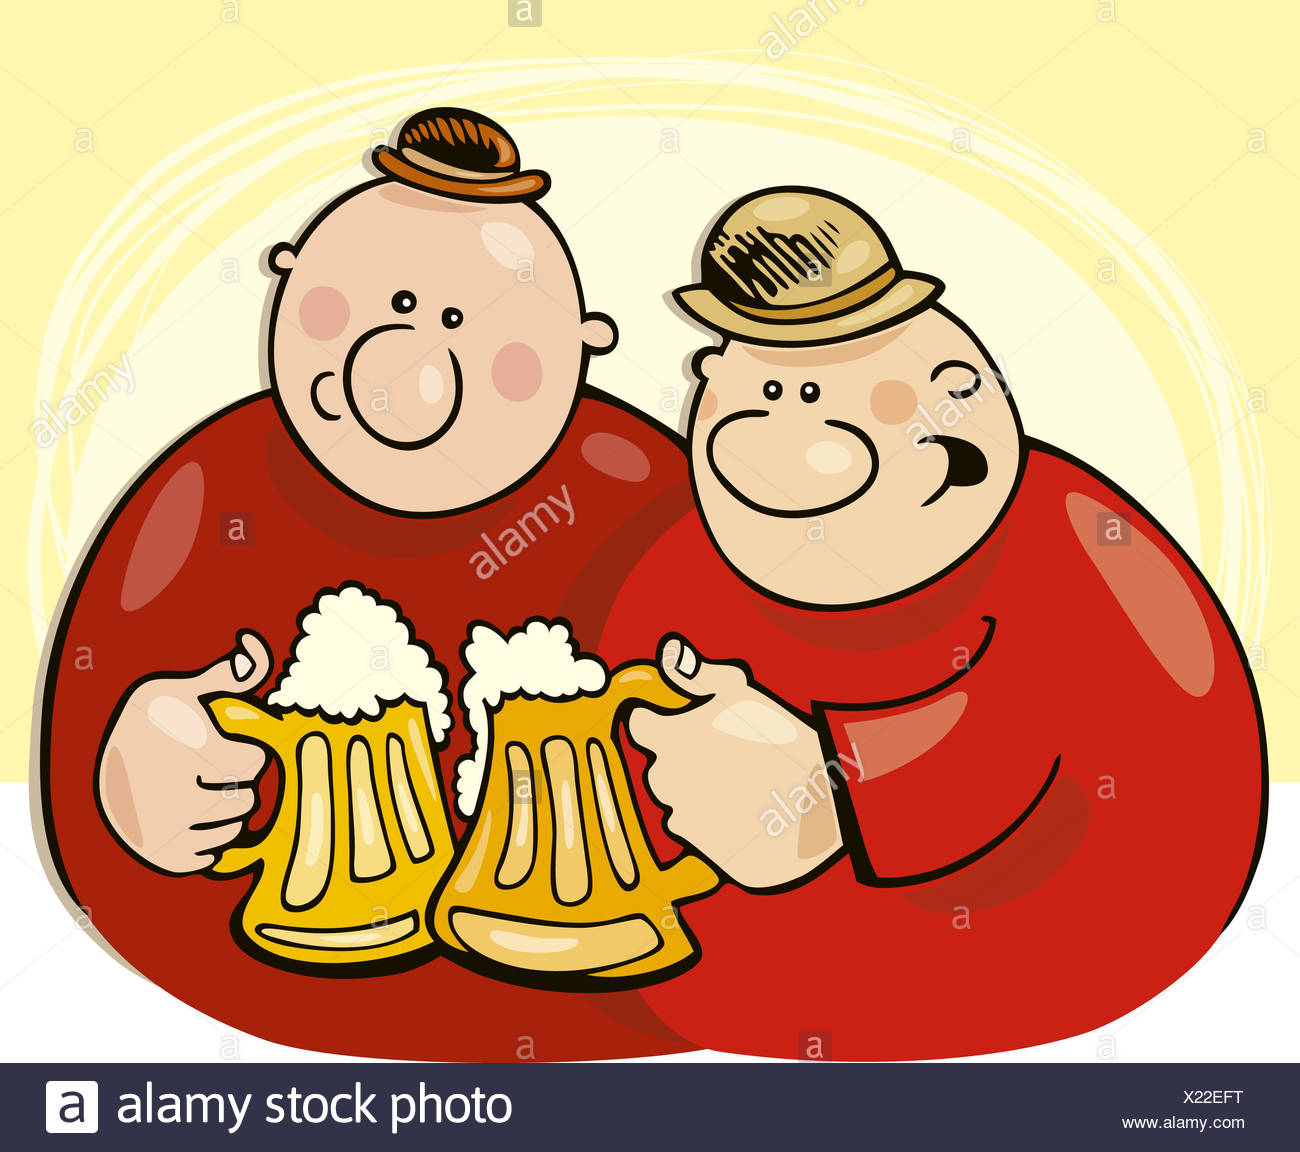 Cartoon Man Drinking Beer High Resolution Stock Photography and Images ...